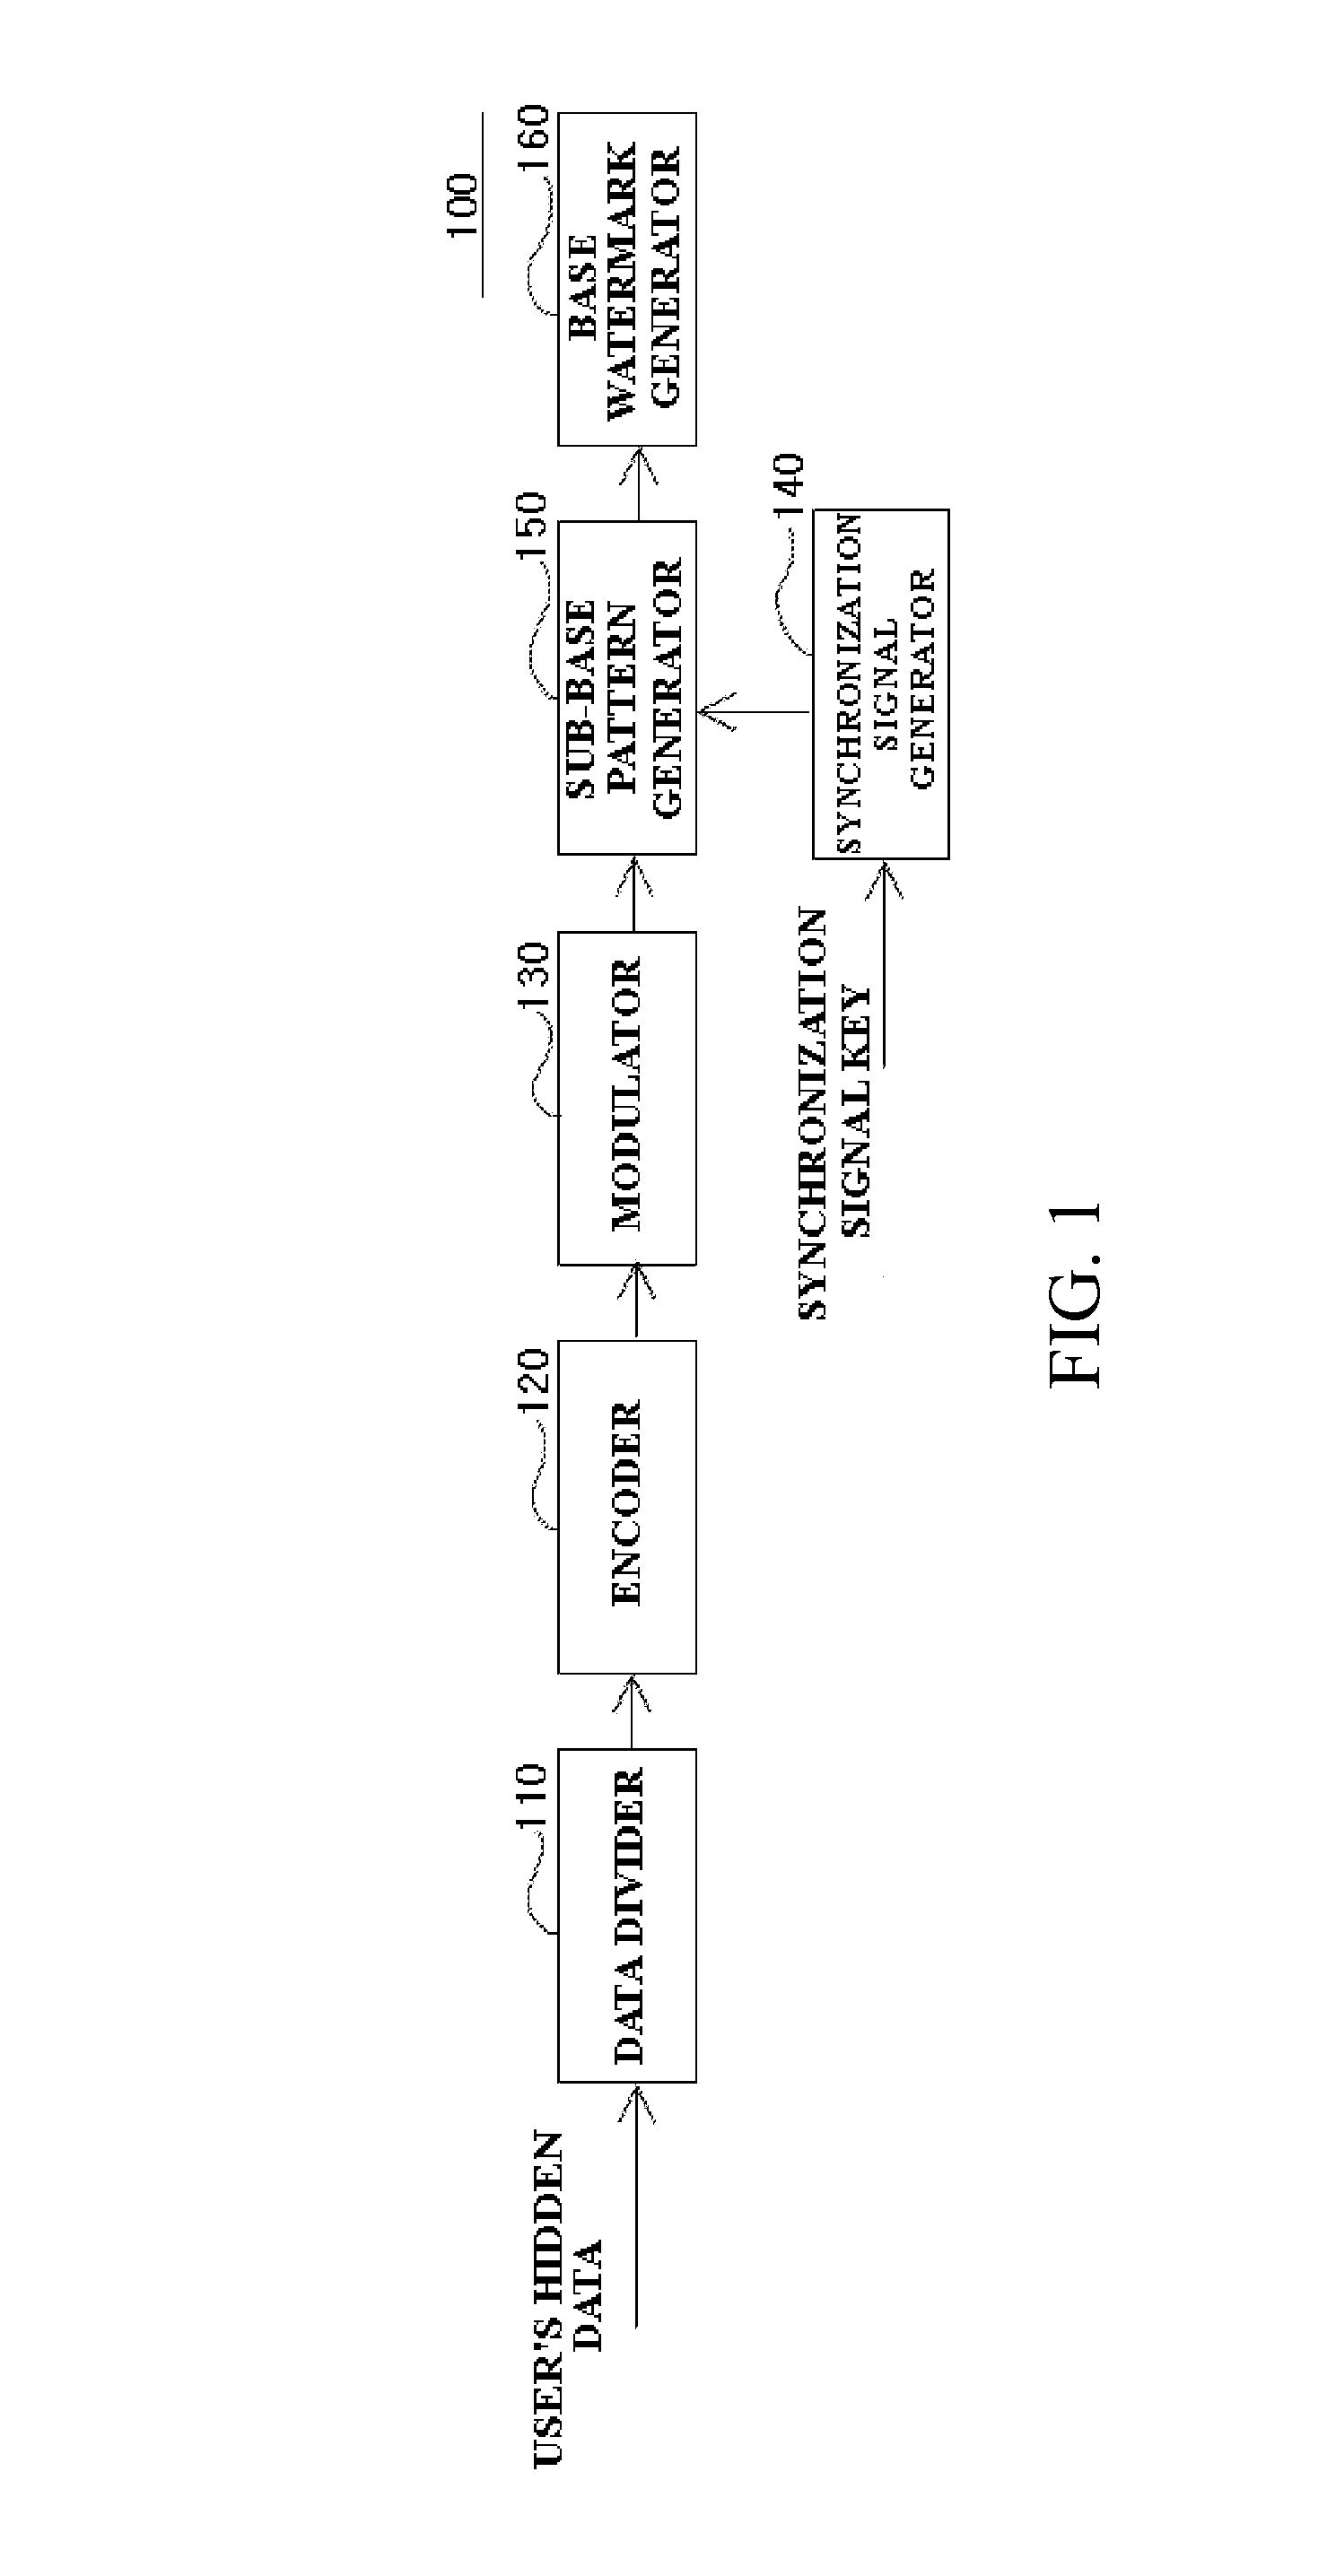 Apparatus and method for generating constructively multi-patterned watermark, and apparatus and method for inserting and detecting the watermark using the same